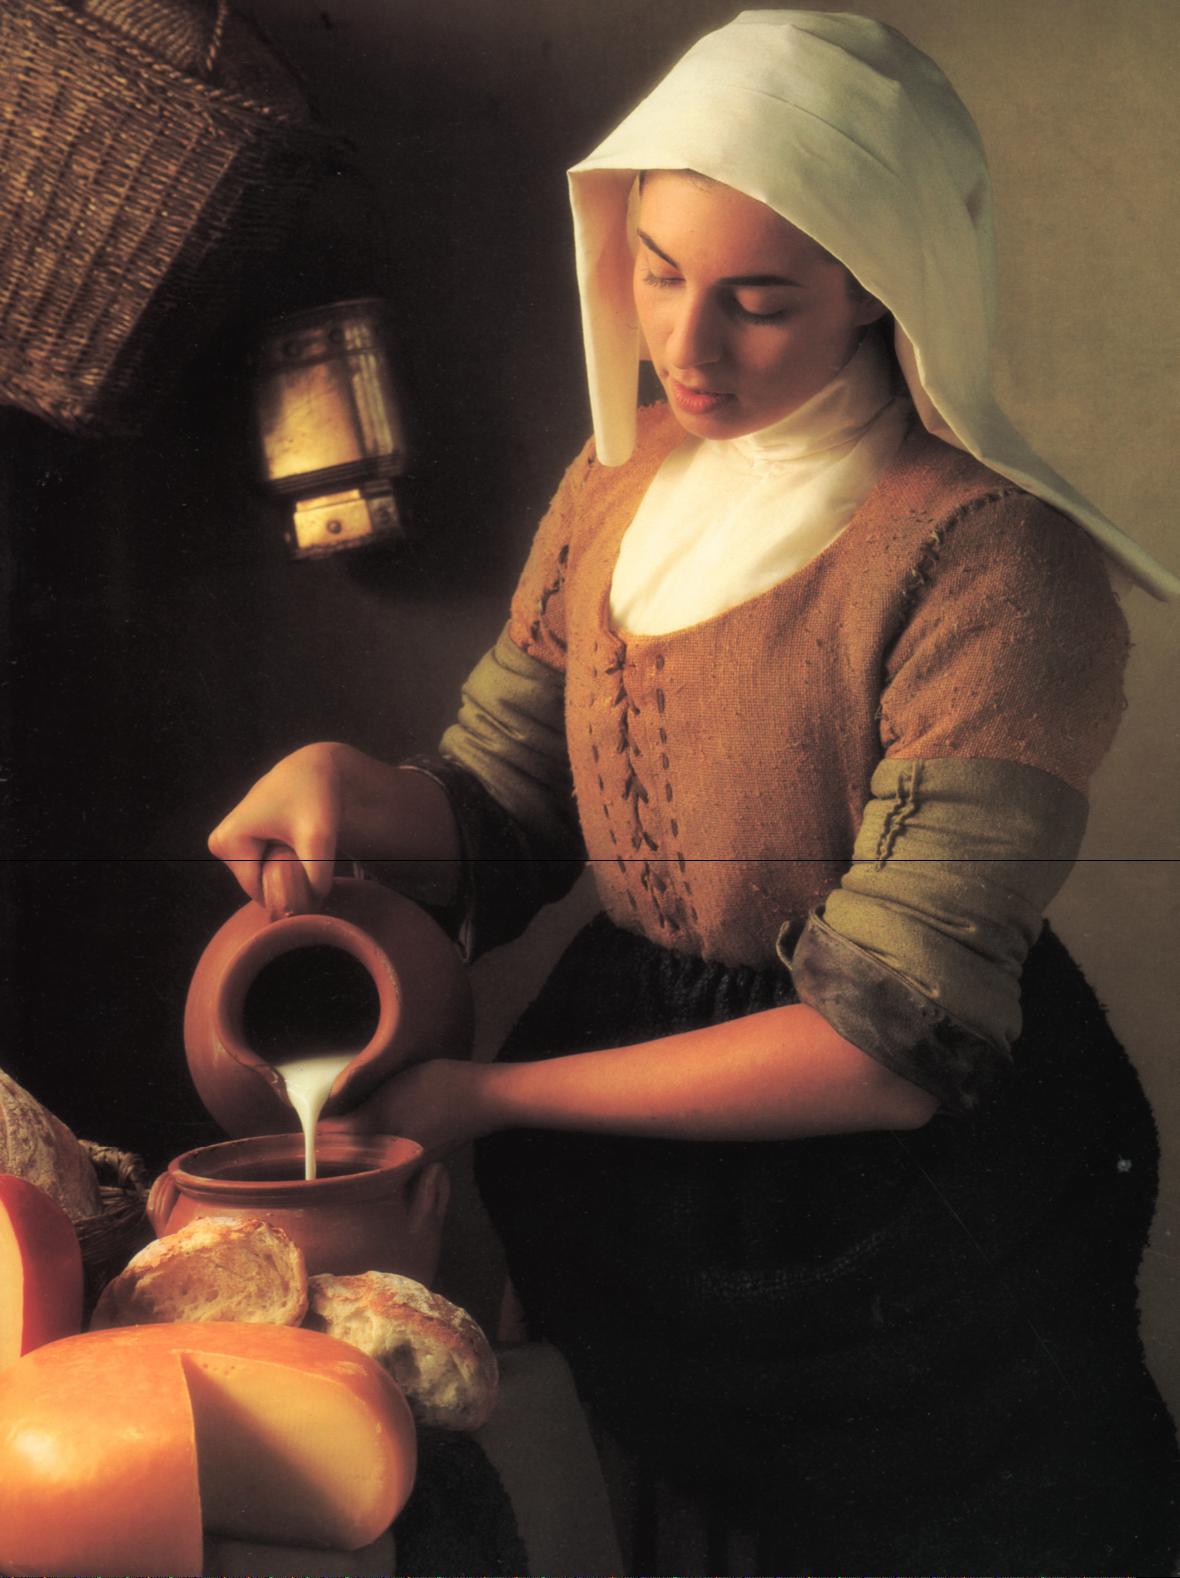 Ellen in an award winning photo duplicating Vermeer's THE MILKMAID for a Holland Cheese ad.